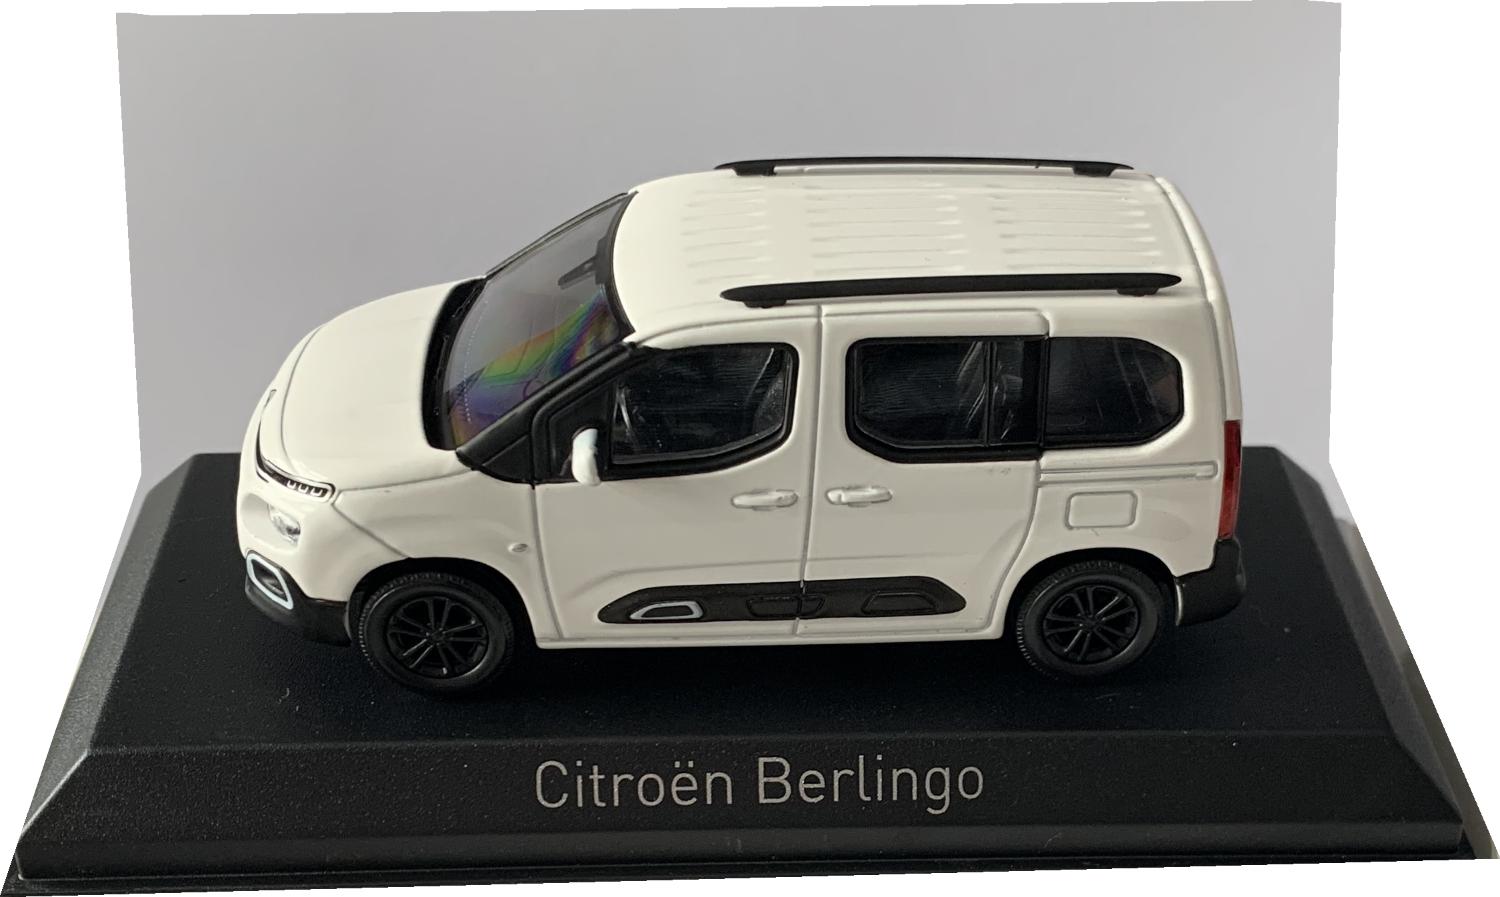 An excellent scale model of a Citroen Berlingo decorated in white with black roof rails, tinted windows and black wheels.  Other trims are finished in black, chrome and white.